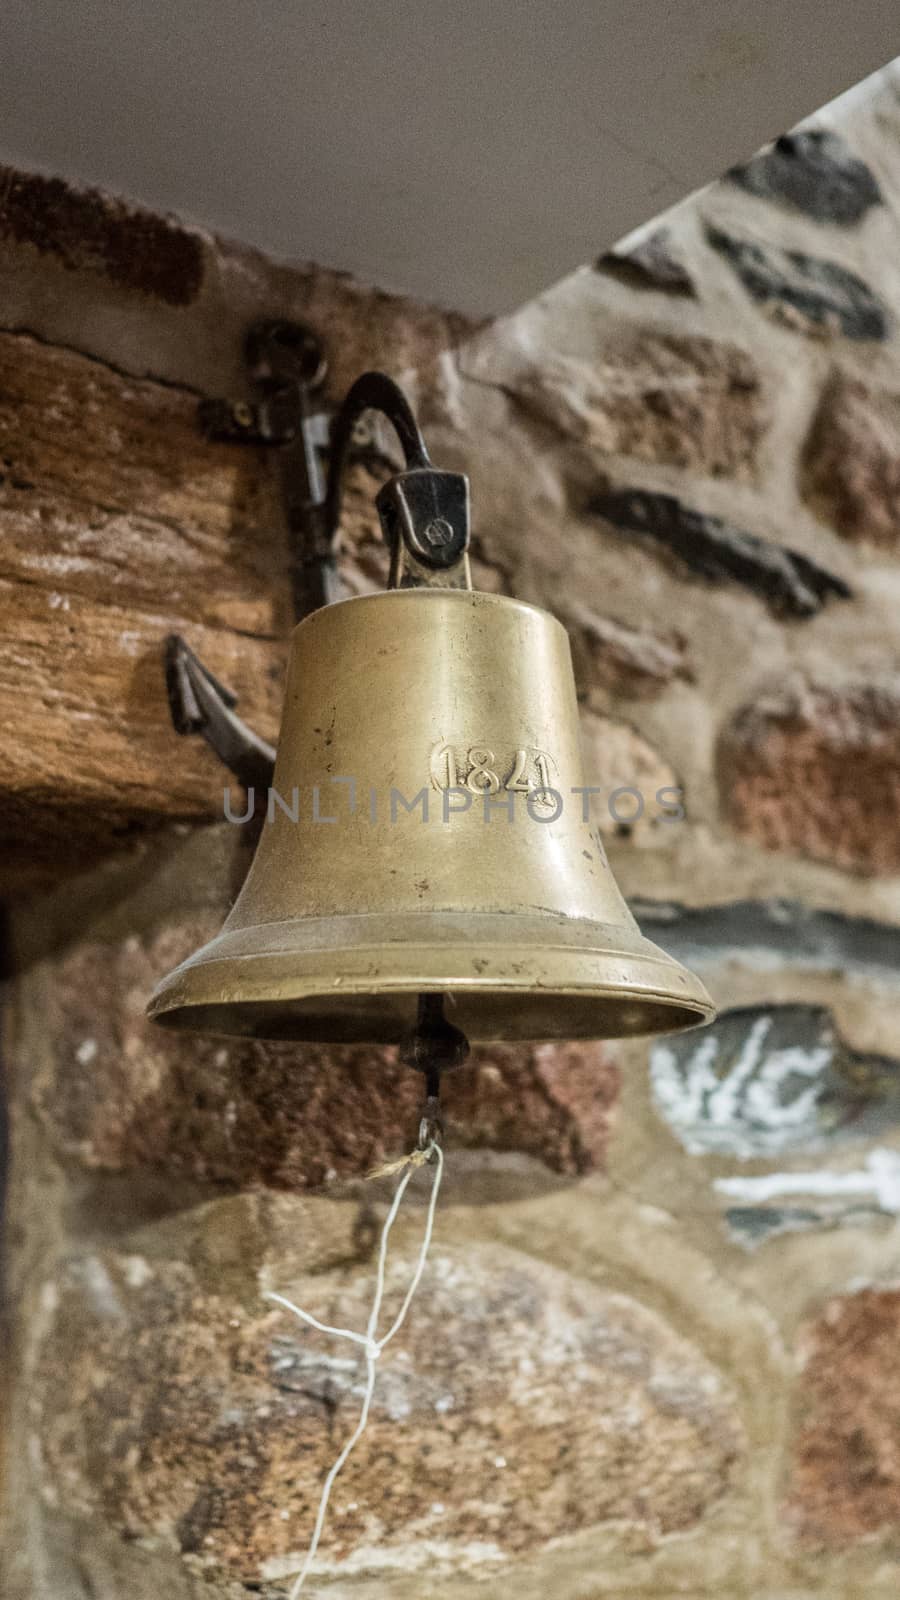 Emblematic French old bronze bell of Mont Saint michel, France 9-9-19